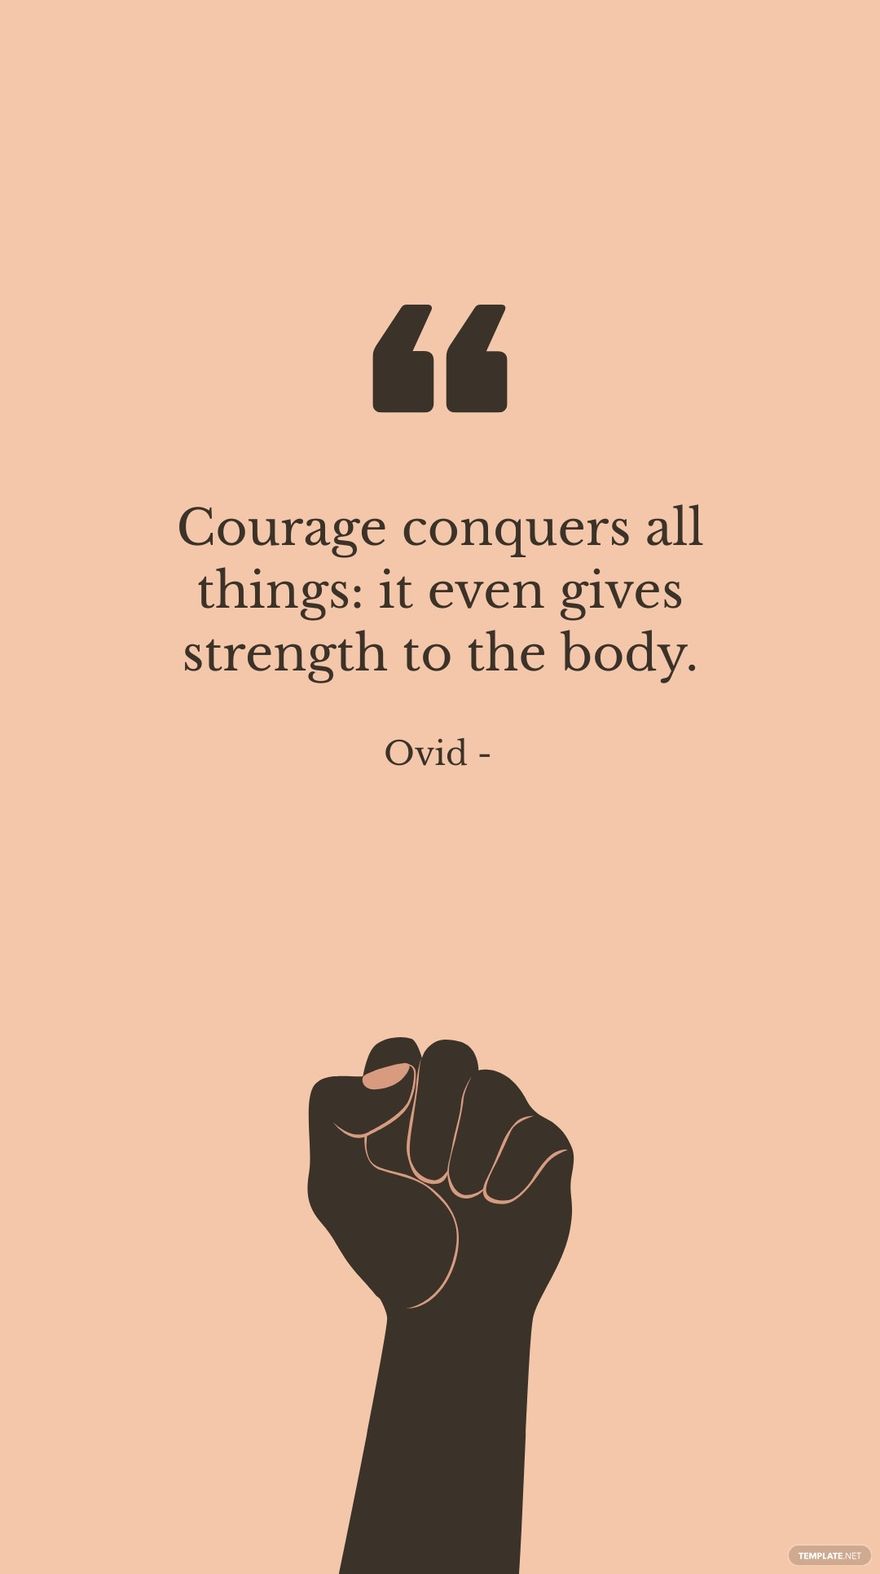 Ovid - Courage conquers all things: it even gives strength to the body.